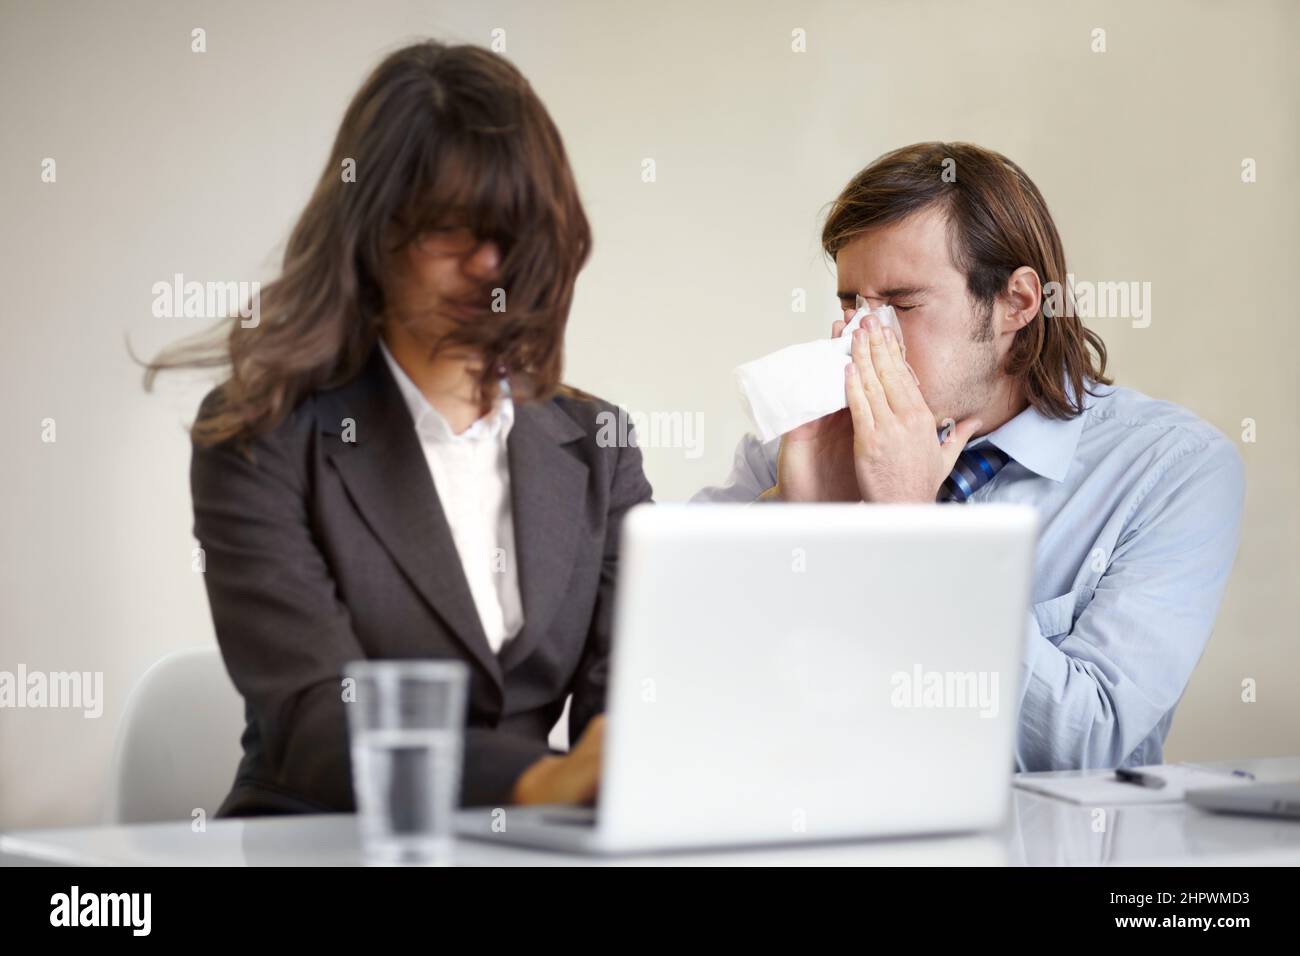 Showing poor manners. A young businessman blowing his nose all over a coworker. Stock Photo